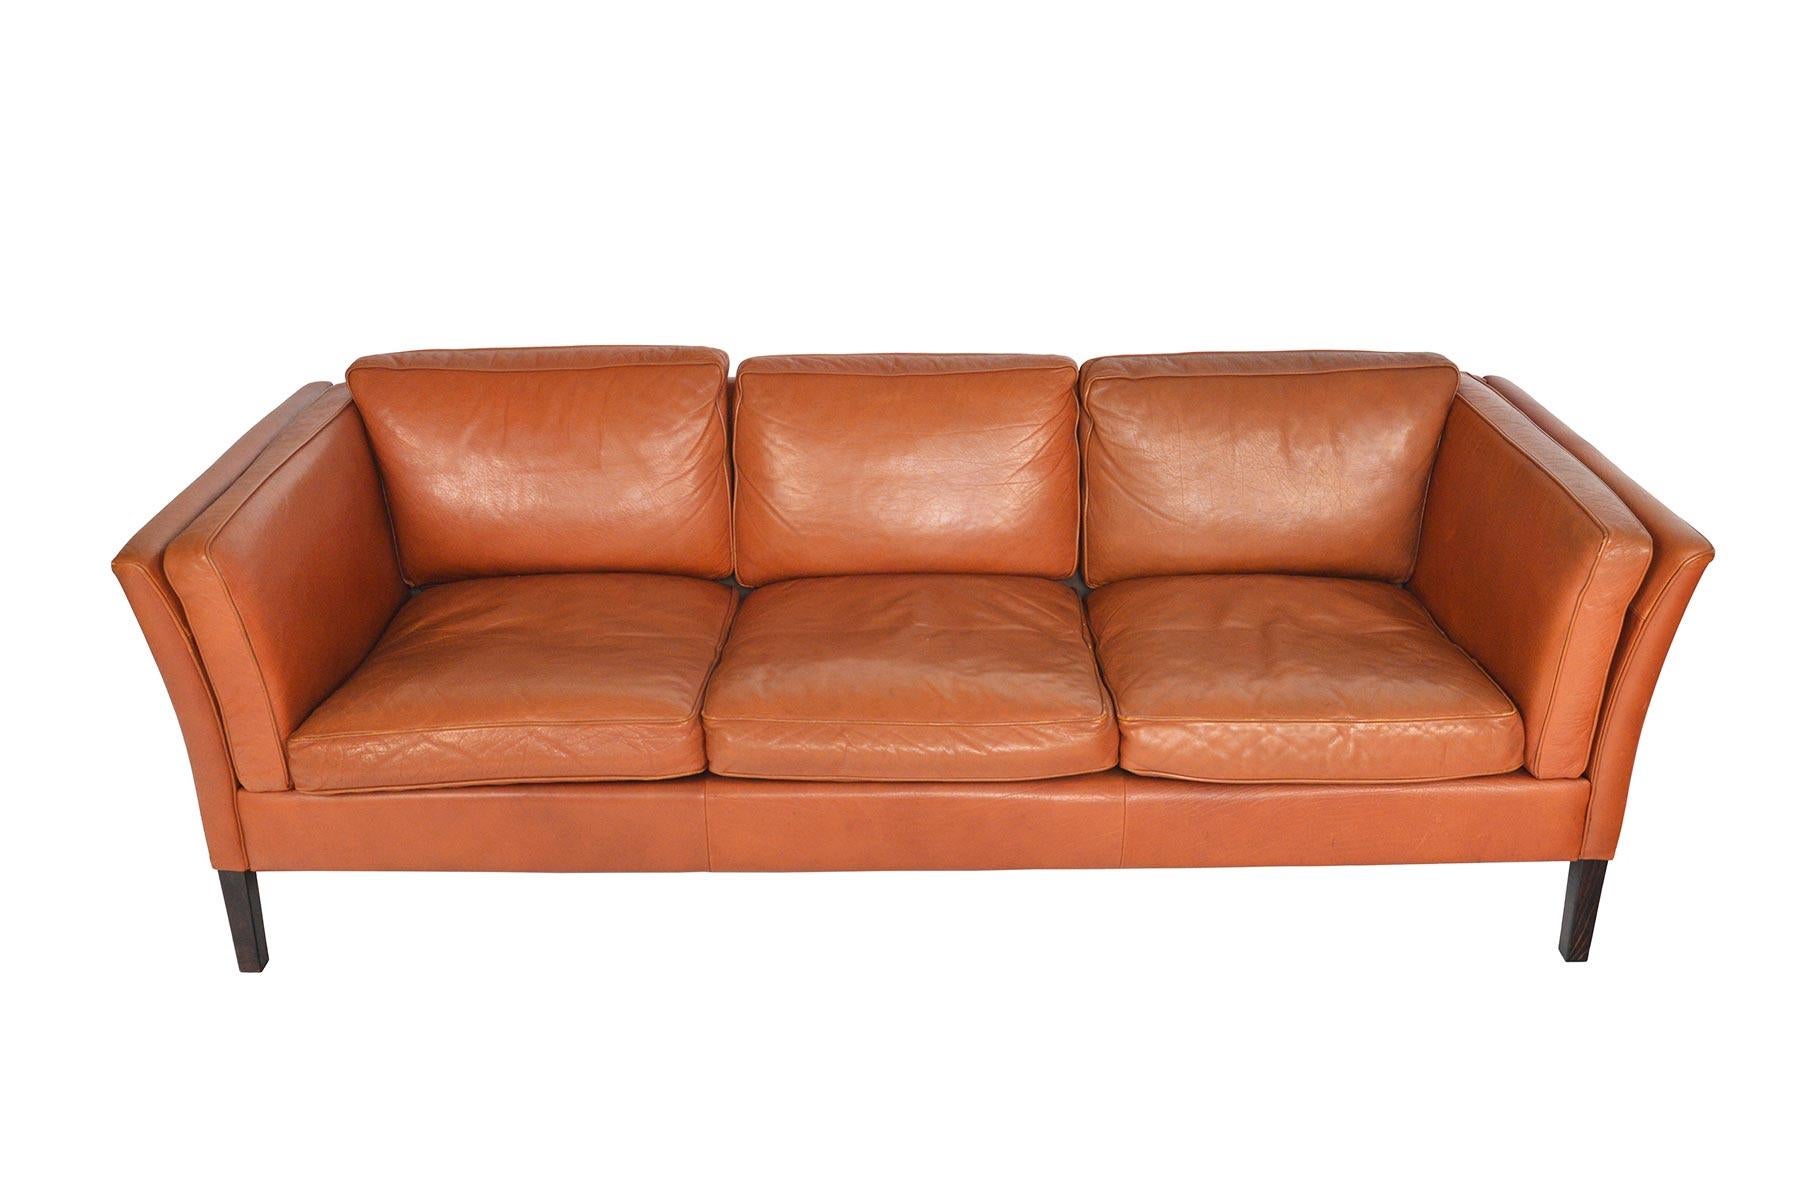 This Danish modern three seat sofa is covered in original caramel colored leather. The gently bowed arms support two arm cushions. Six cushions nestle in the frame. Piece stands on stained oak legs. In excellent original condition.

 